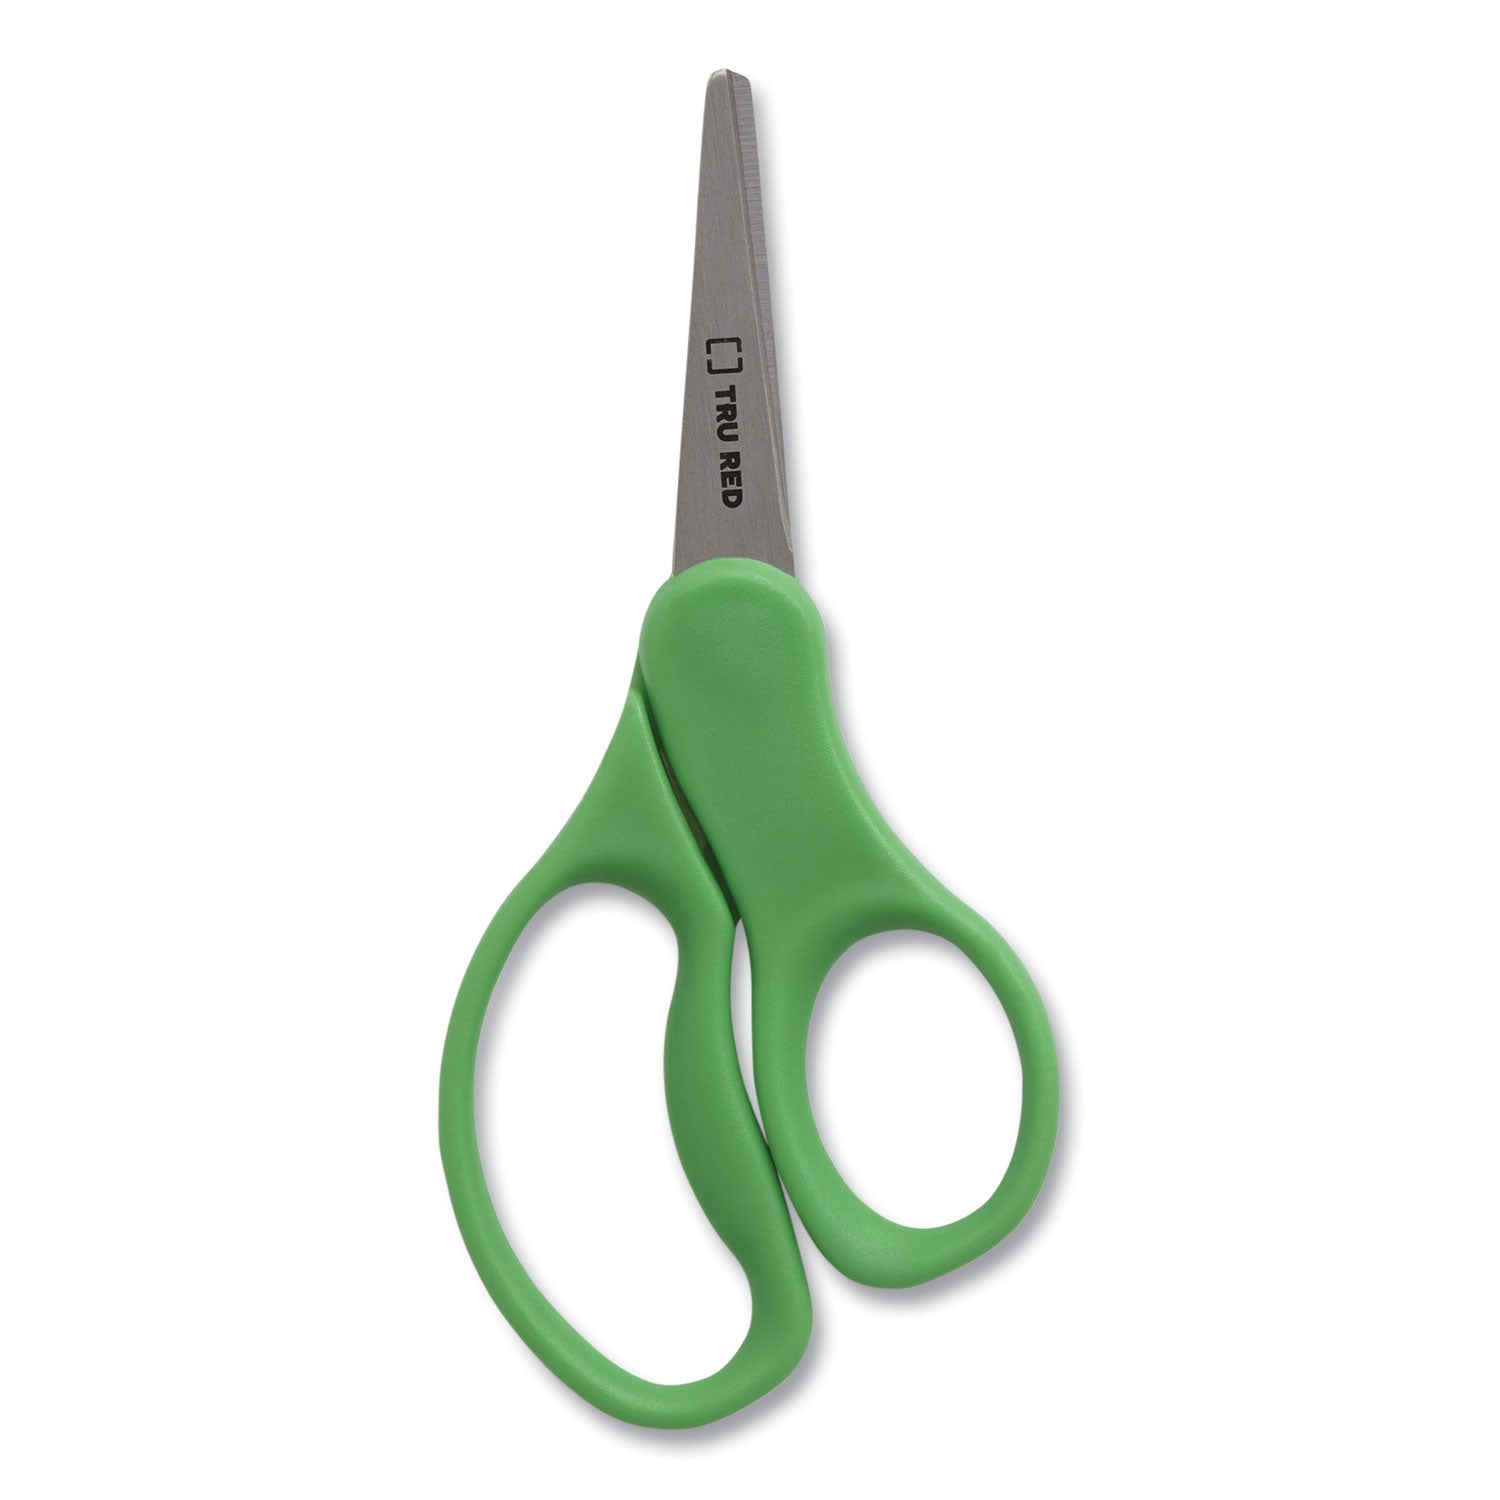 kids-pointed-tip-stainless-steel-scissors-5-long-205-cut-length-assorted-straight-handles-12-pack_tud24380506 - 2